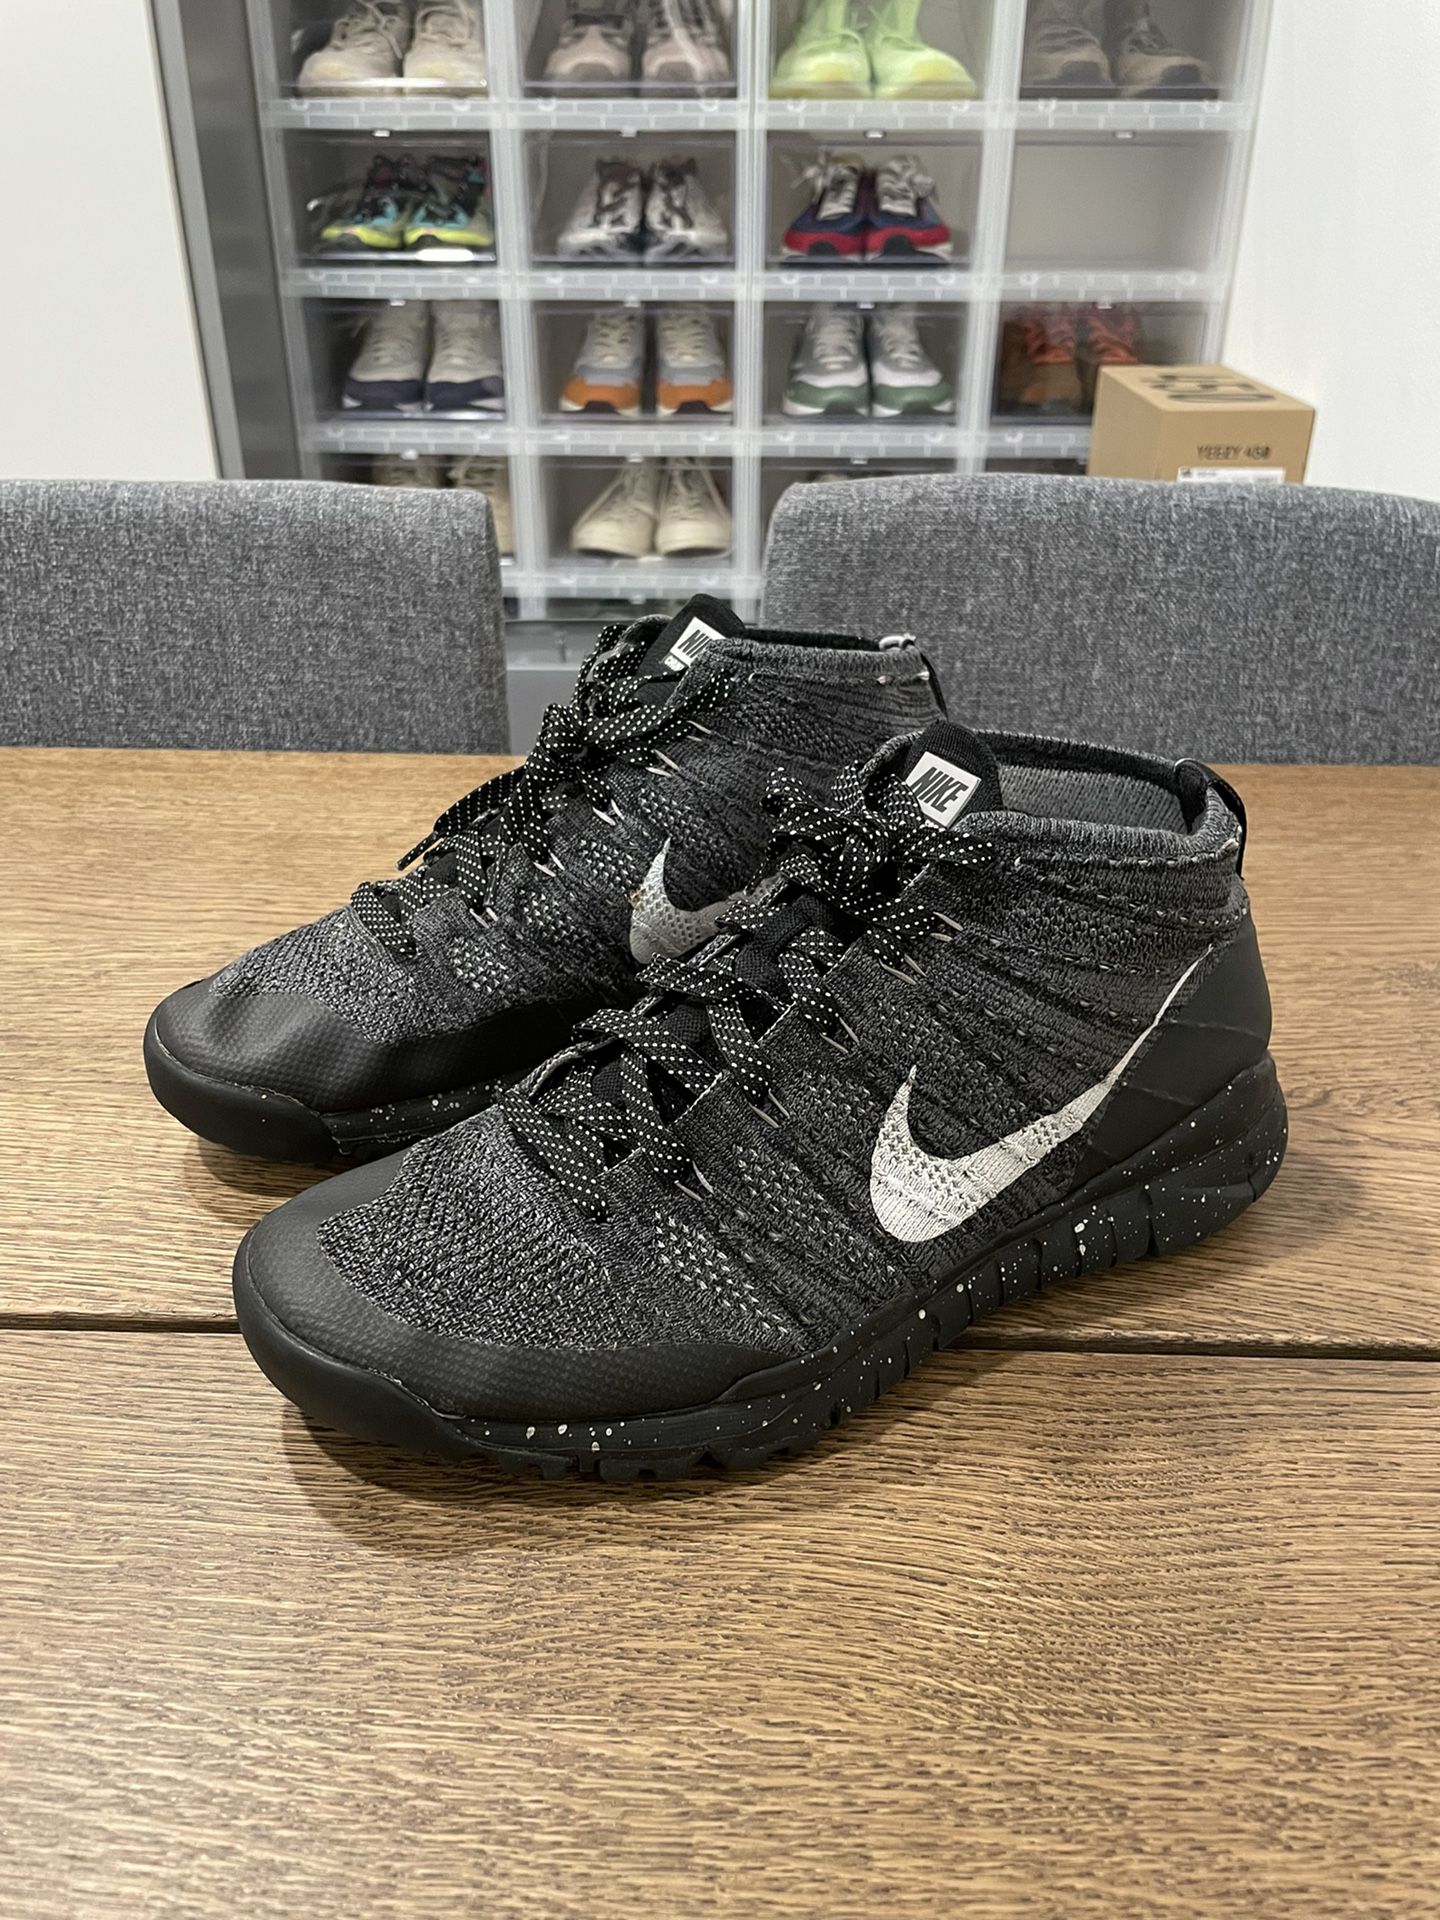 compacto defecto muerte Nike Flyknit Trainer Chukka FSB Black Charcoal Sz 10.5 (used) for Sale in  Oakland, CA - OfferUp